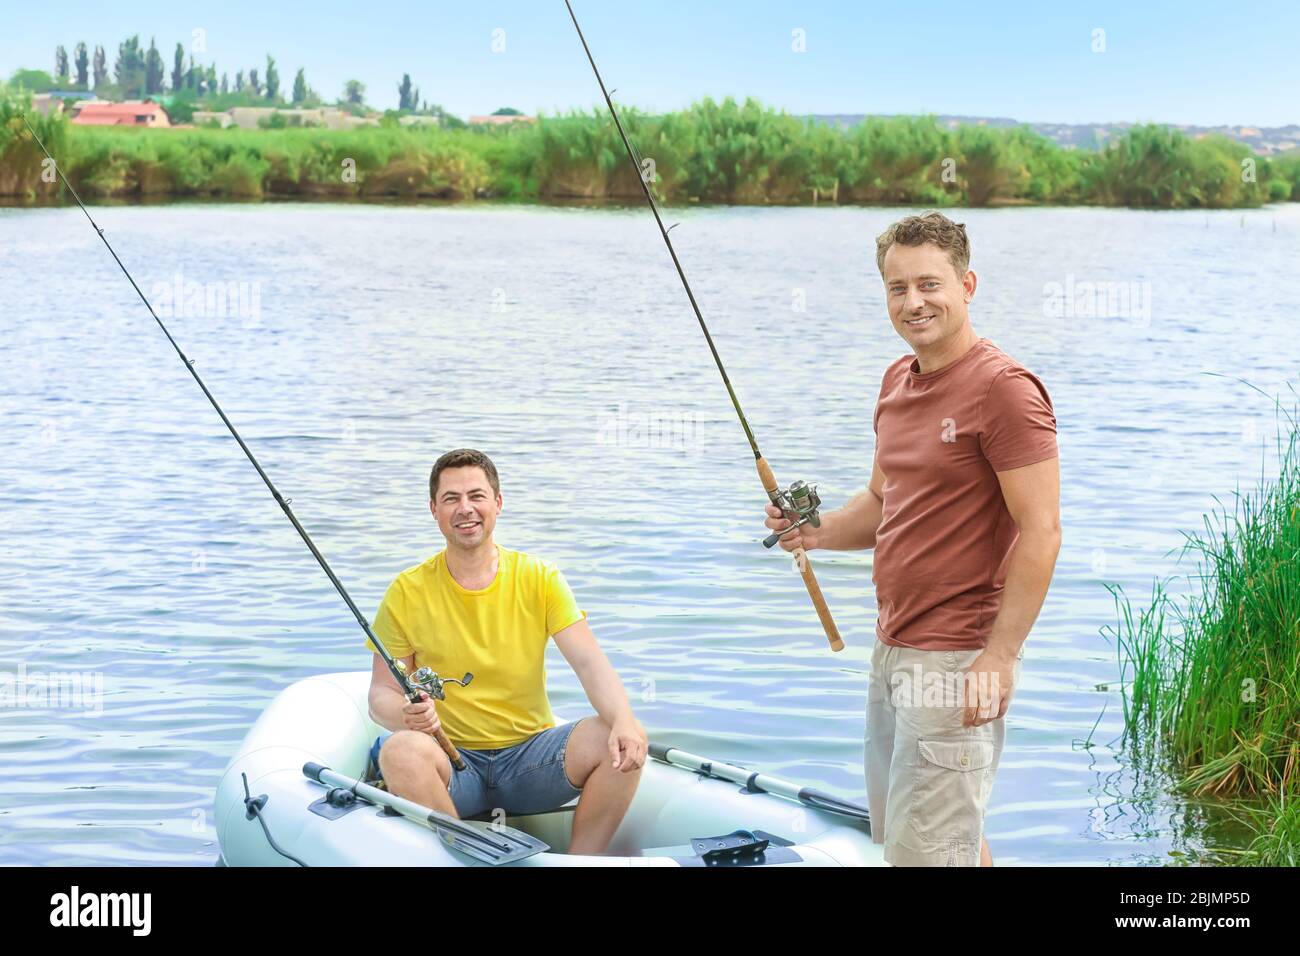 https://c8.alamy.com/comp/2BJMP5D/two-men-fishing-from-inflatable-boat-on-river-2BJMP5D.jpg